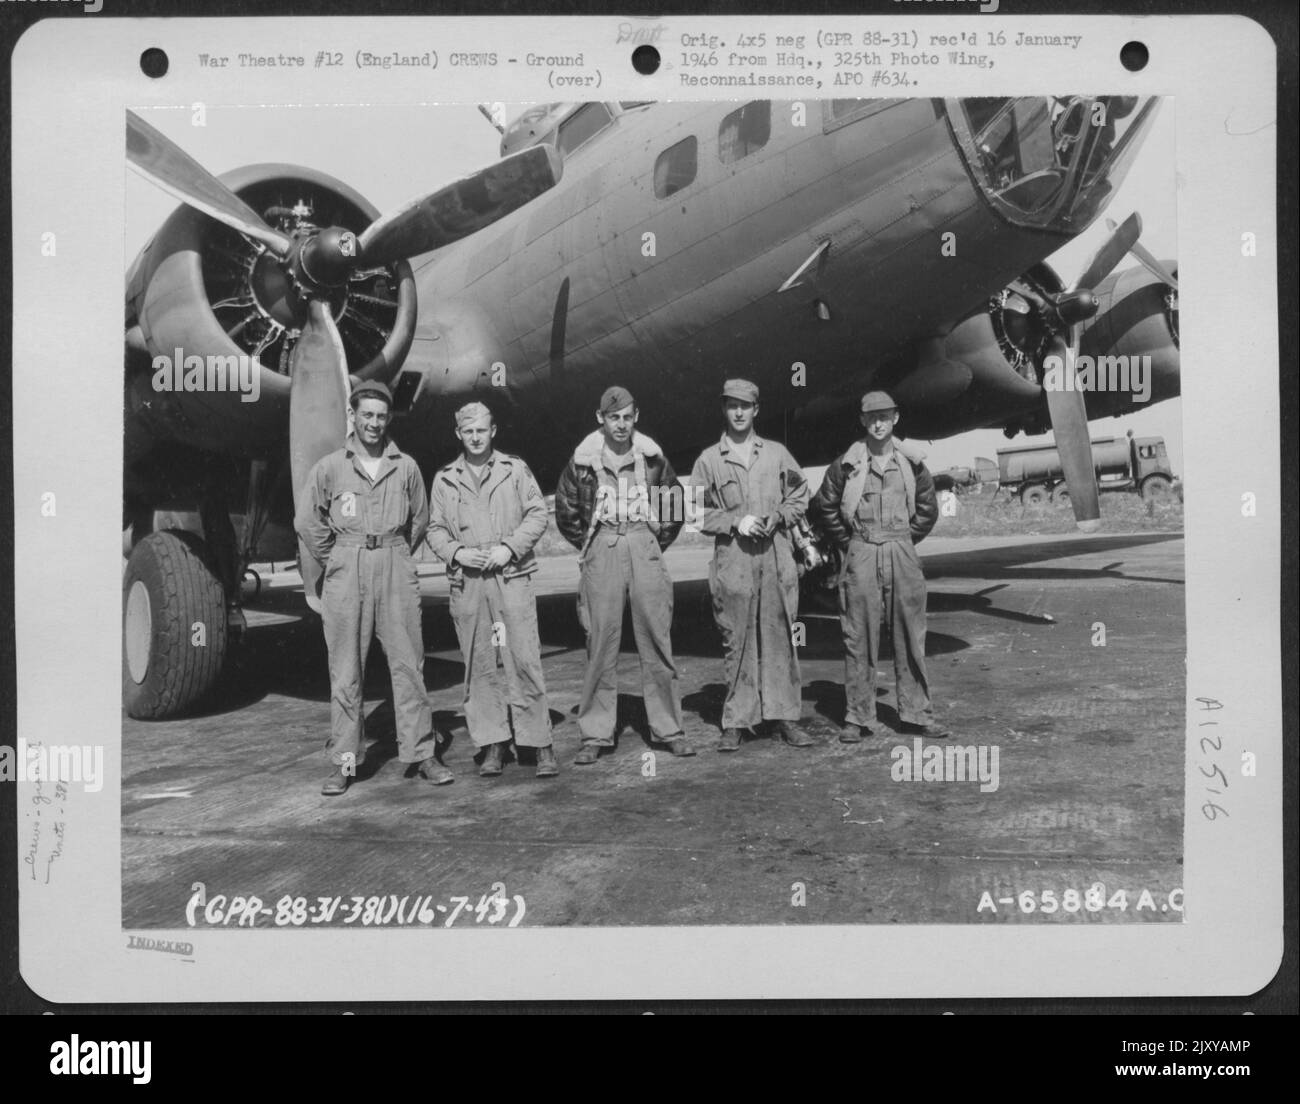 https://c8.alamy.com/comp/2JXYAMP/ground-crew-of-the-381st-bomb-group-in-front-of-a-boeing-b-17-flying-fortress-at-8th-air-force-base-167-england-16-july-1943-2JXYAMP.jpg